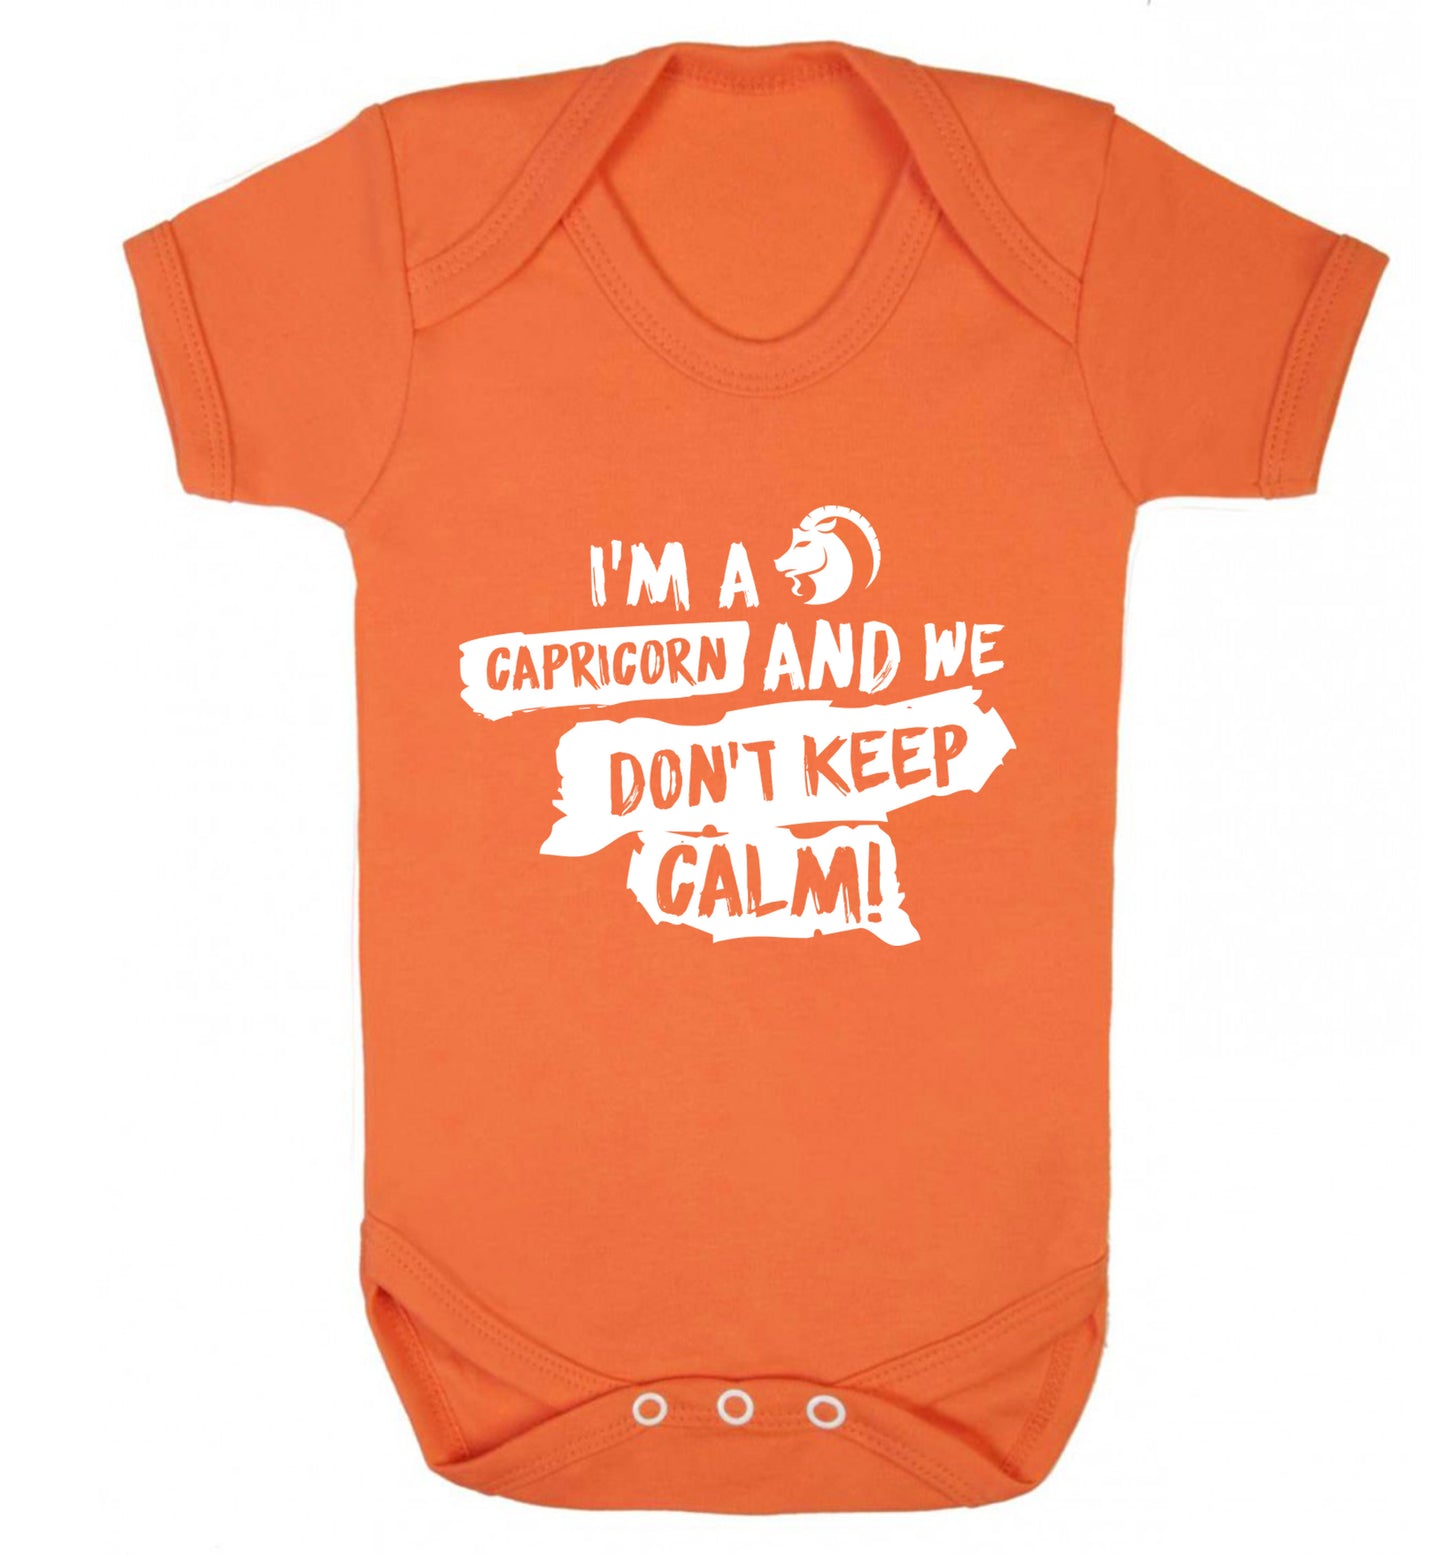 I'm a capricorn and we don't keep calm Baby Vest orange 18-24 months